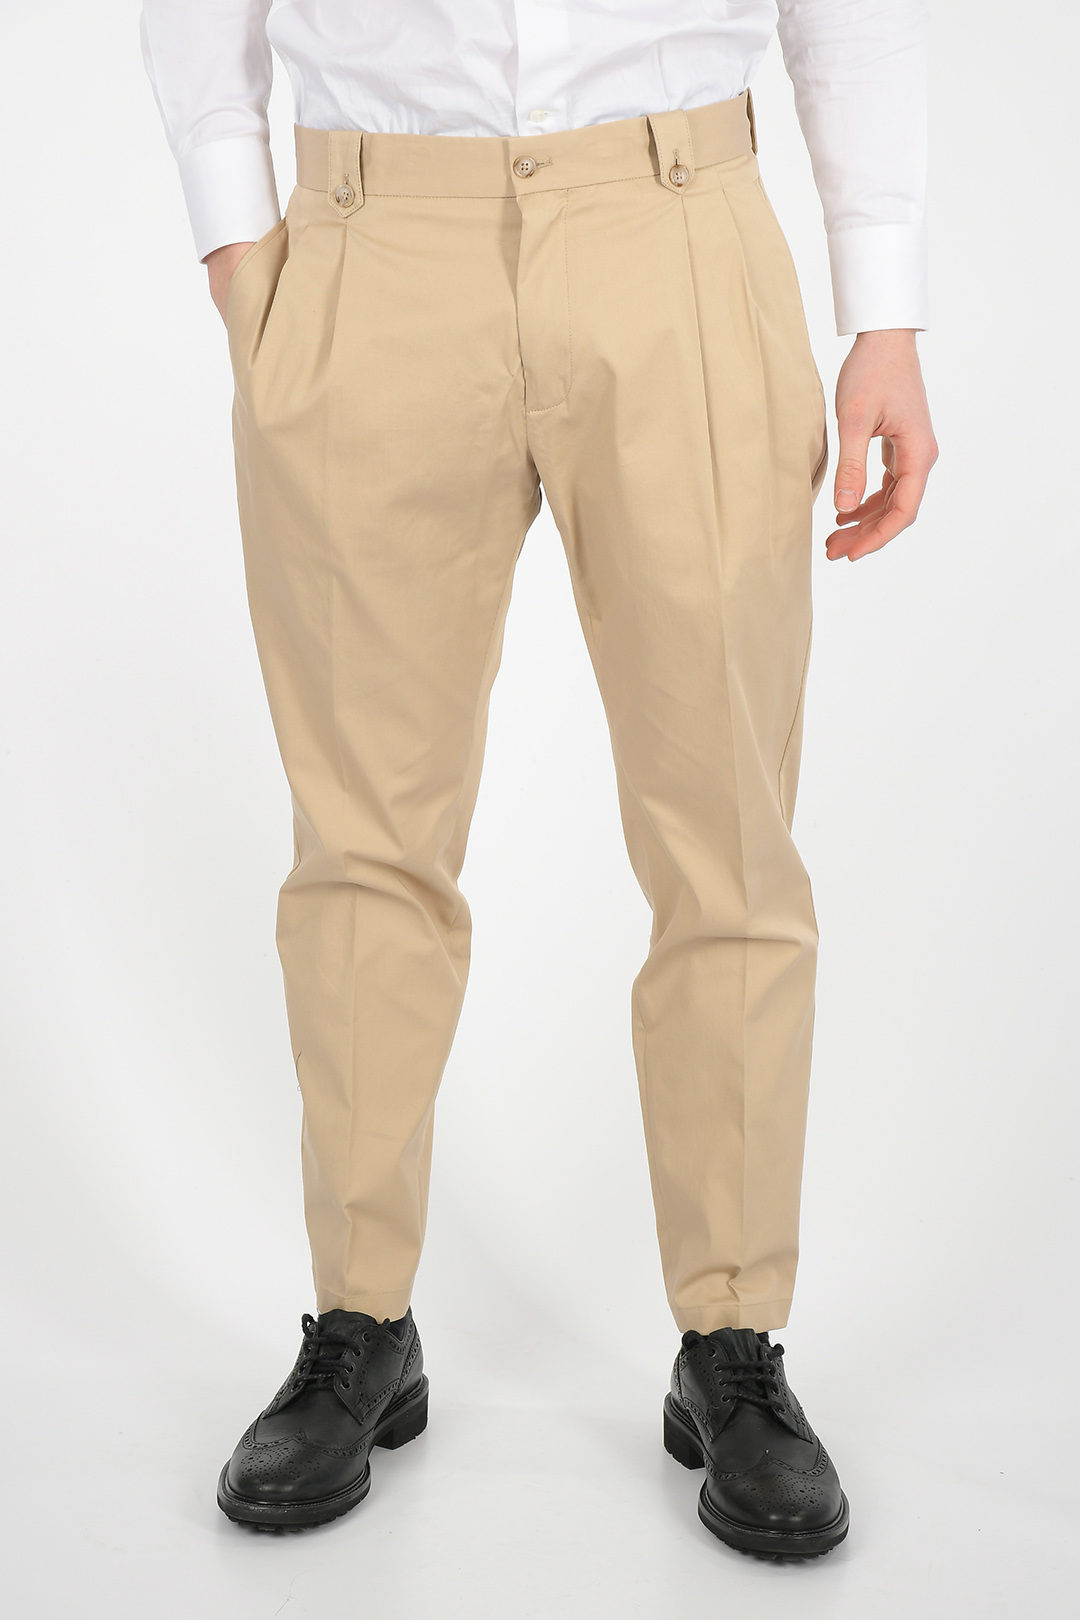 Dolce & Gabbana Double Pleat Pants with Jetted Pockets men - Glamood Outlet